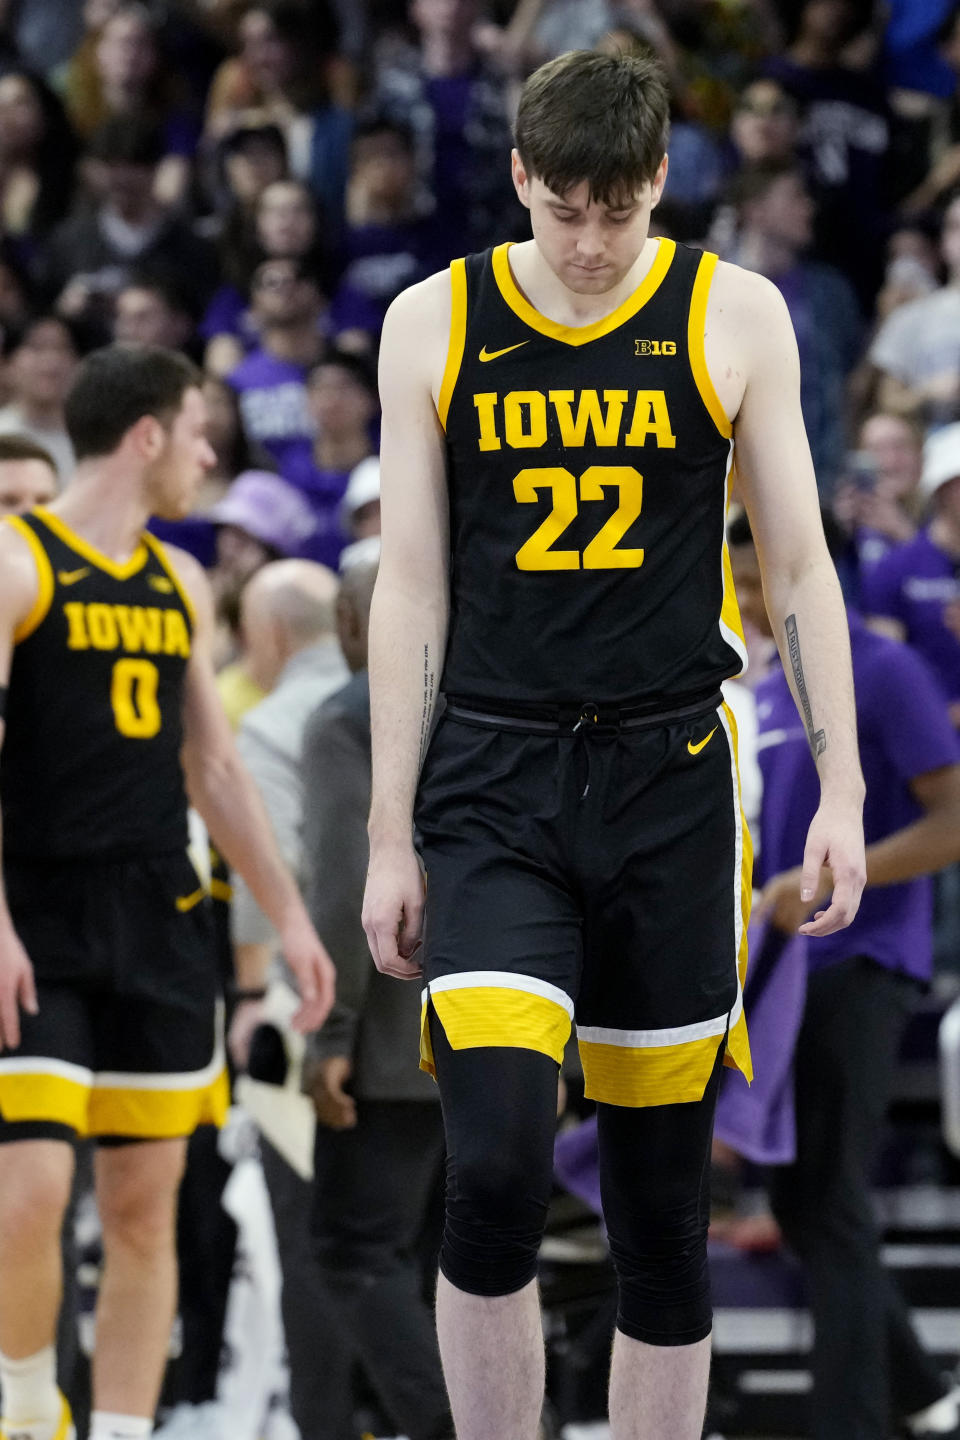 Iowa forward Patrick McCaffery walks on the court during the first half of an NCAA college basketball game against Northwestern in Evanston, Ill., Sunday, Feb. 19, 2023. (AP Photo/Nam Y. Huh)